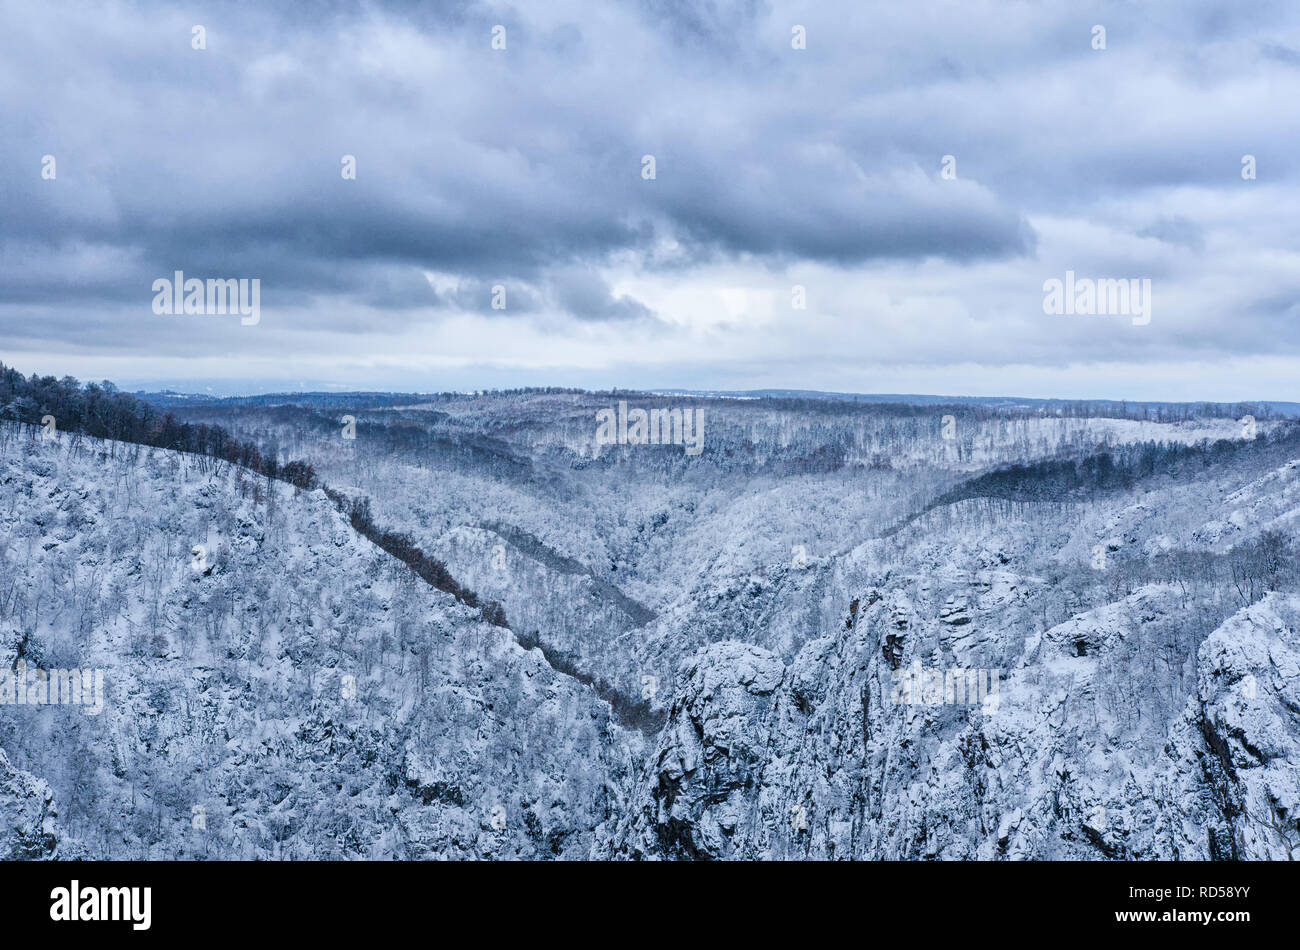 Vast Harz mountain range of central Germany under a moody clouds sky in winter Stock Photo